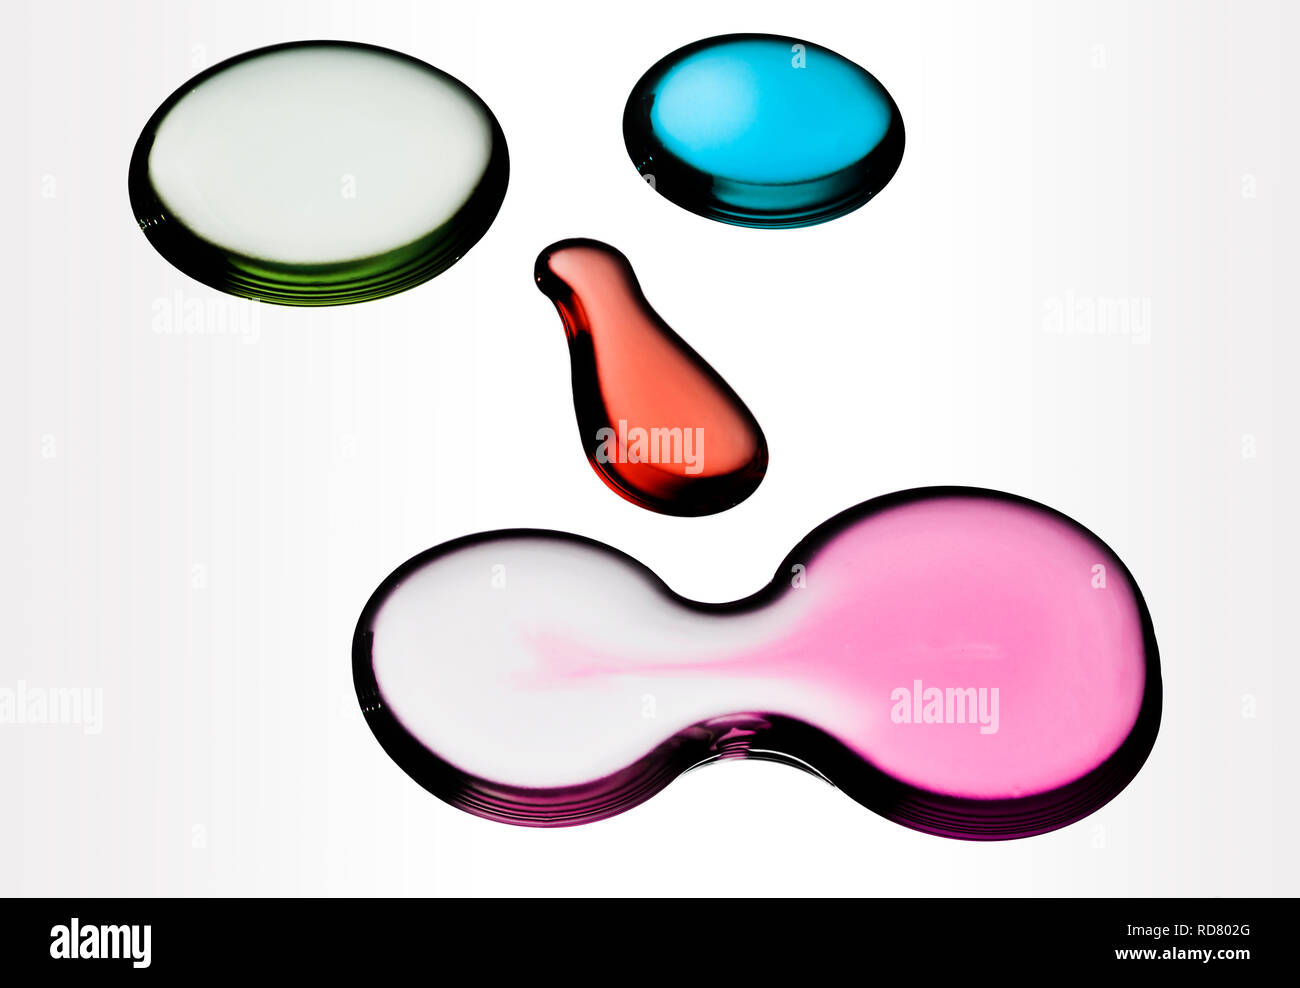 Colorful rounded pieces of glass on white background Stock Photo